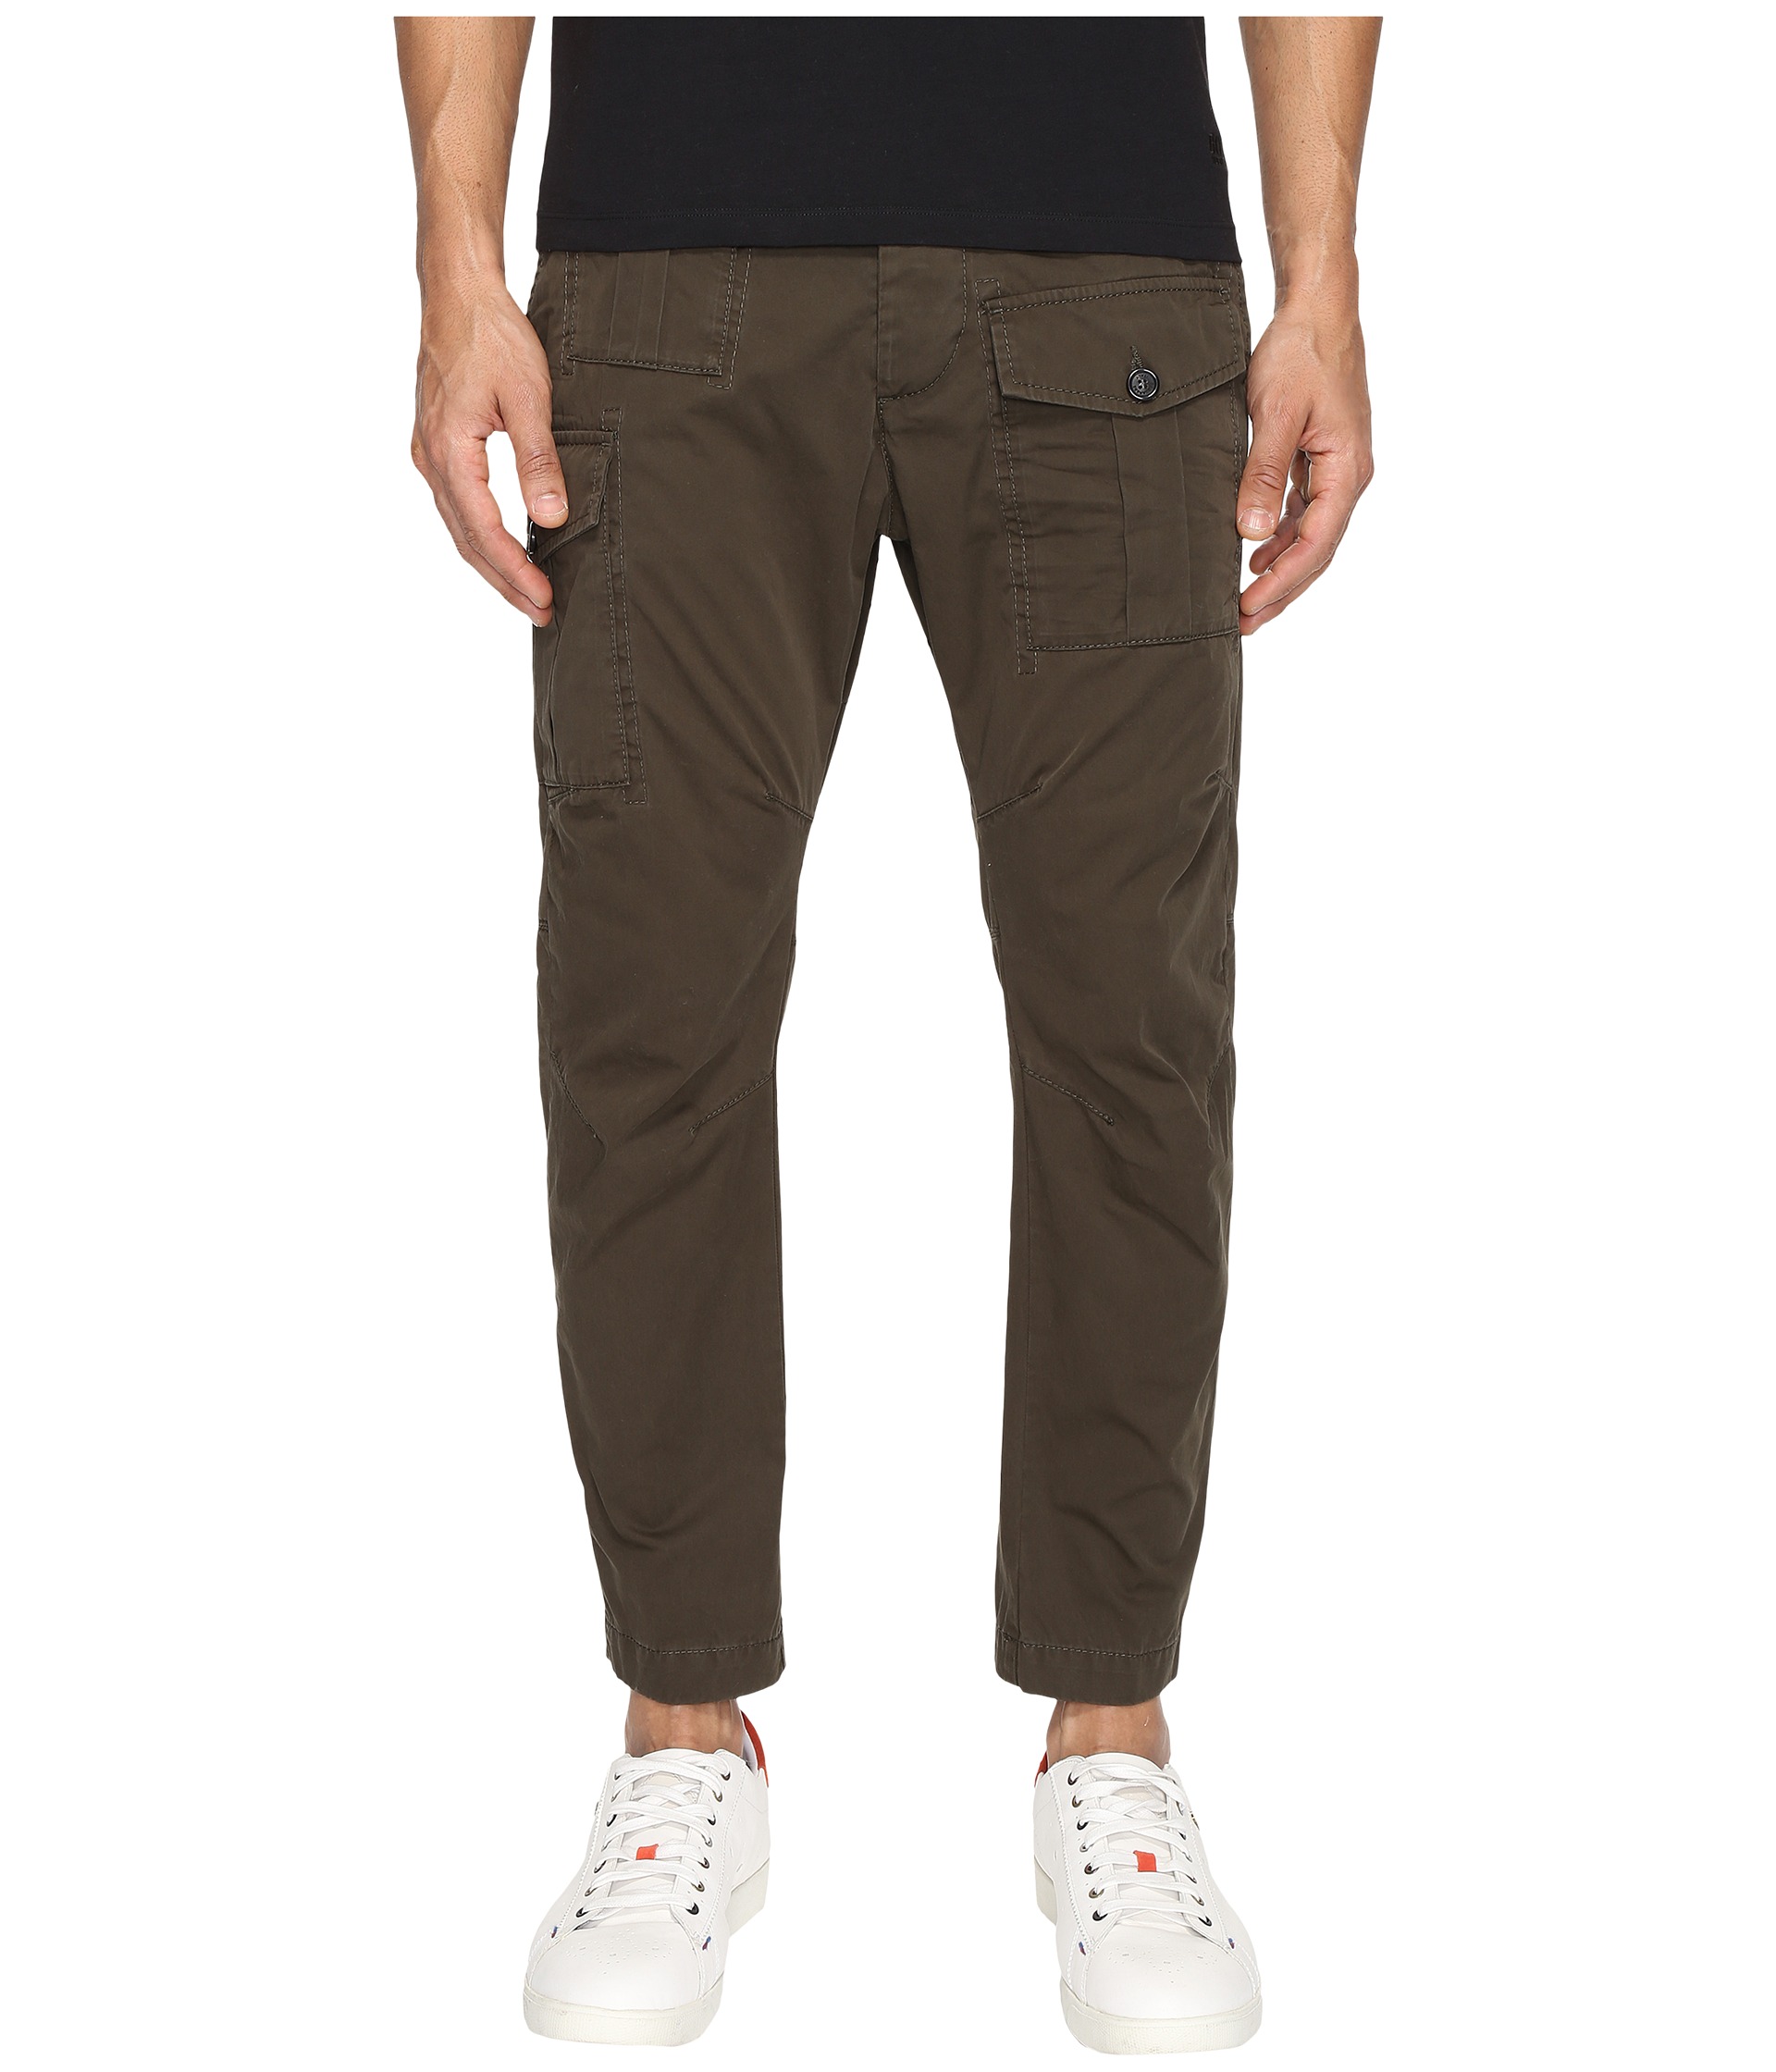 DSQUARED2 Sexy Cargo Pants - Zappos.com Free Shipping BOTH Ways